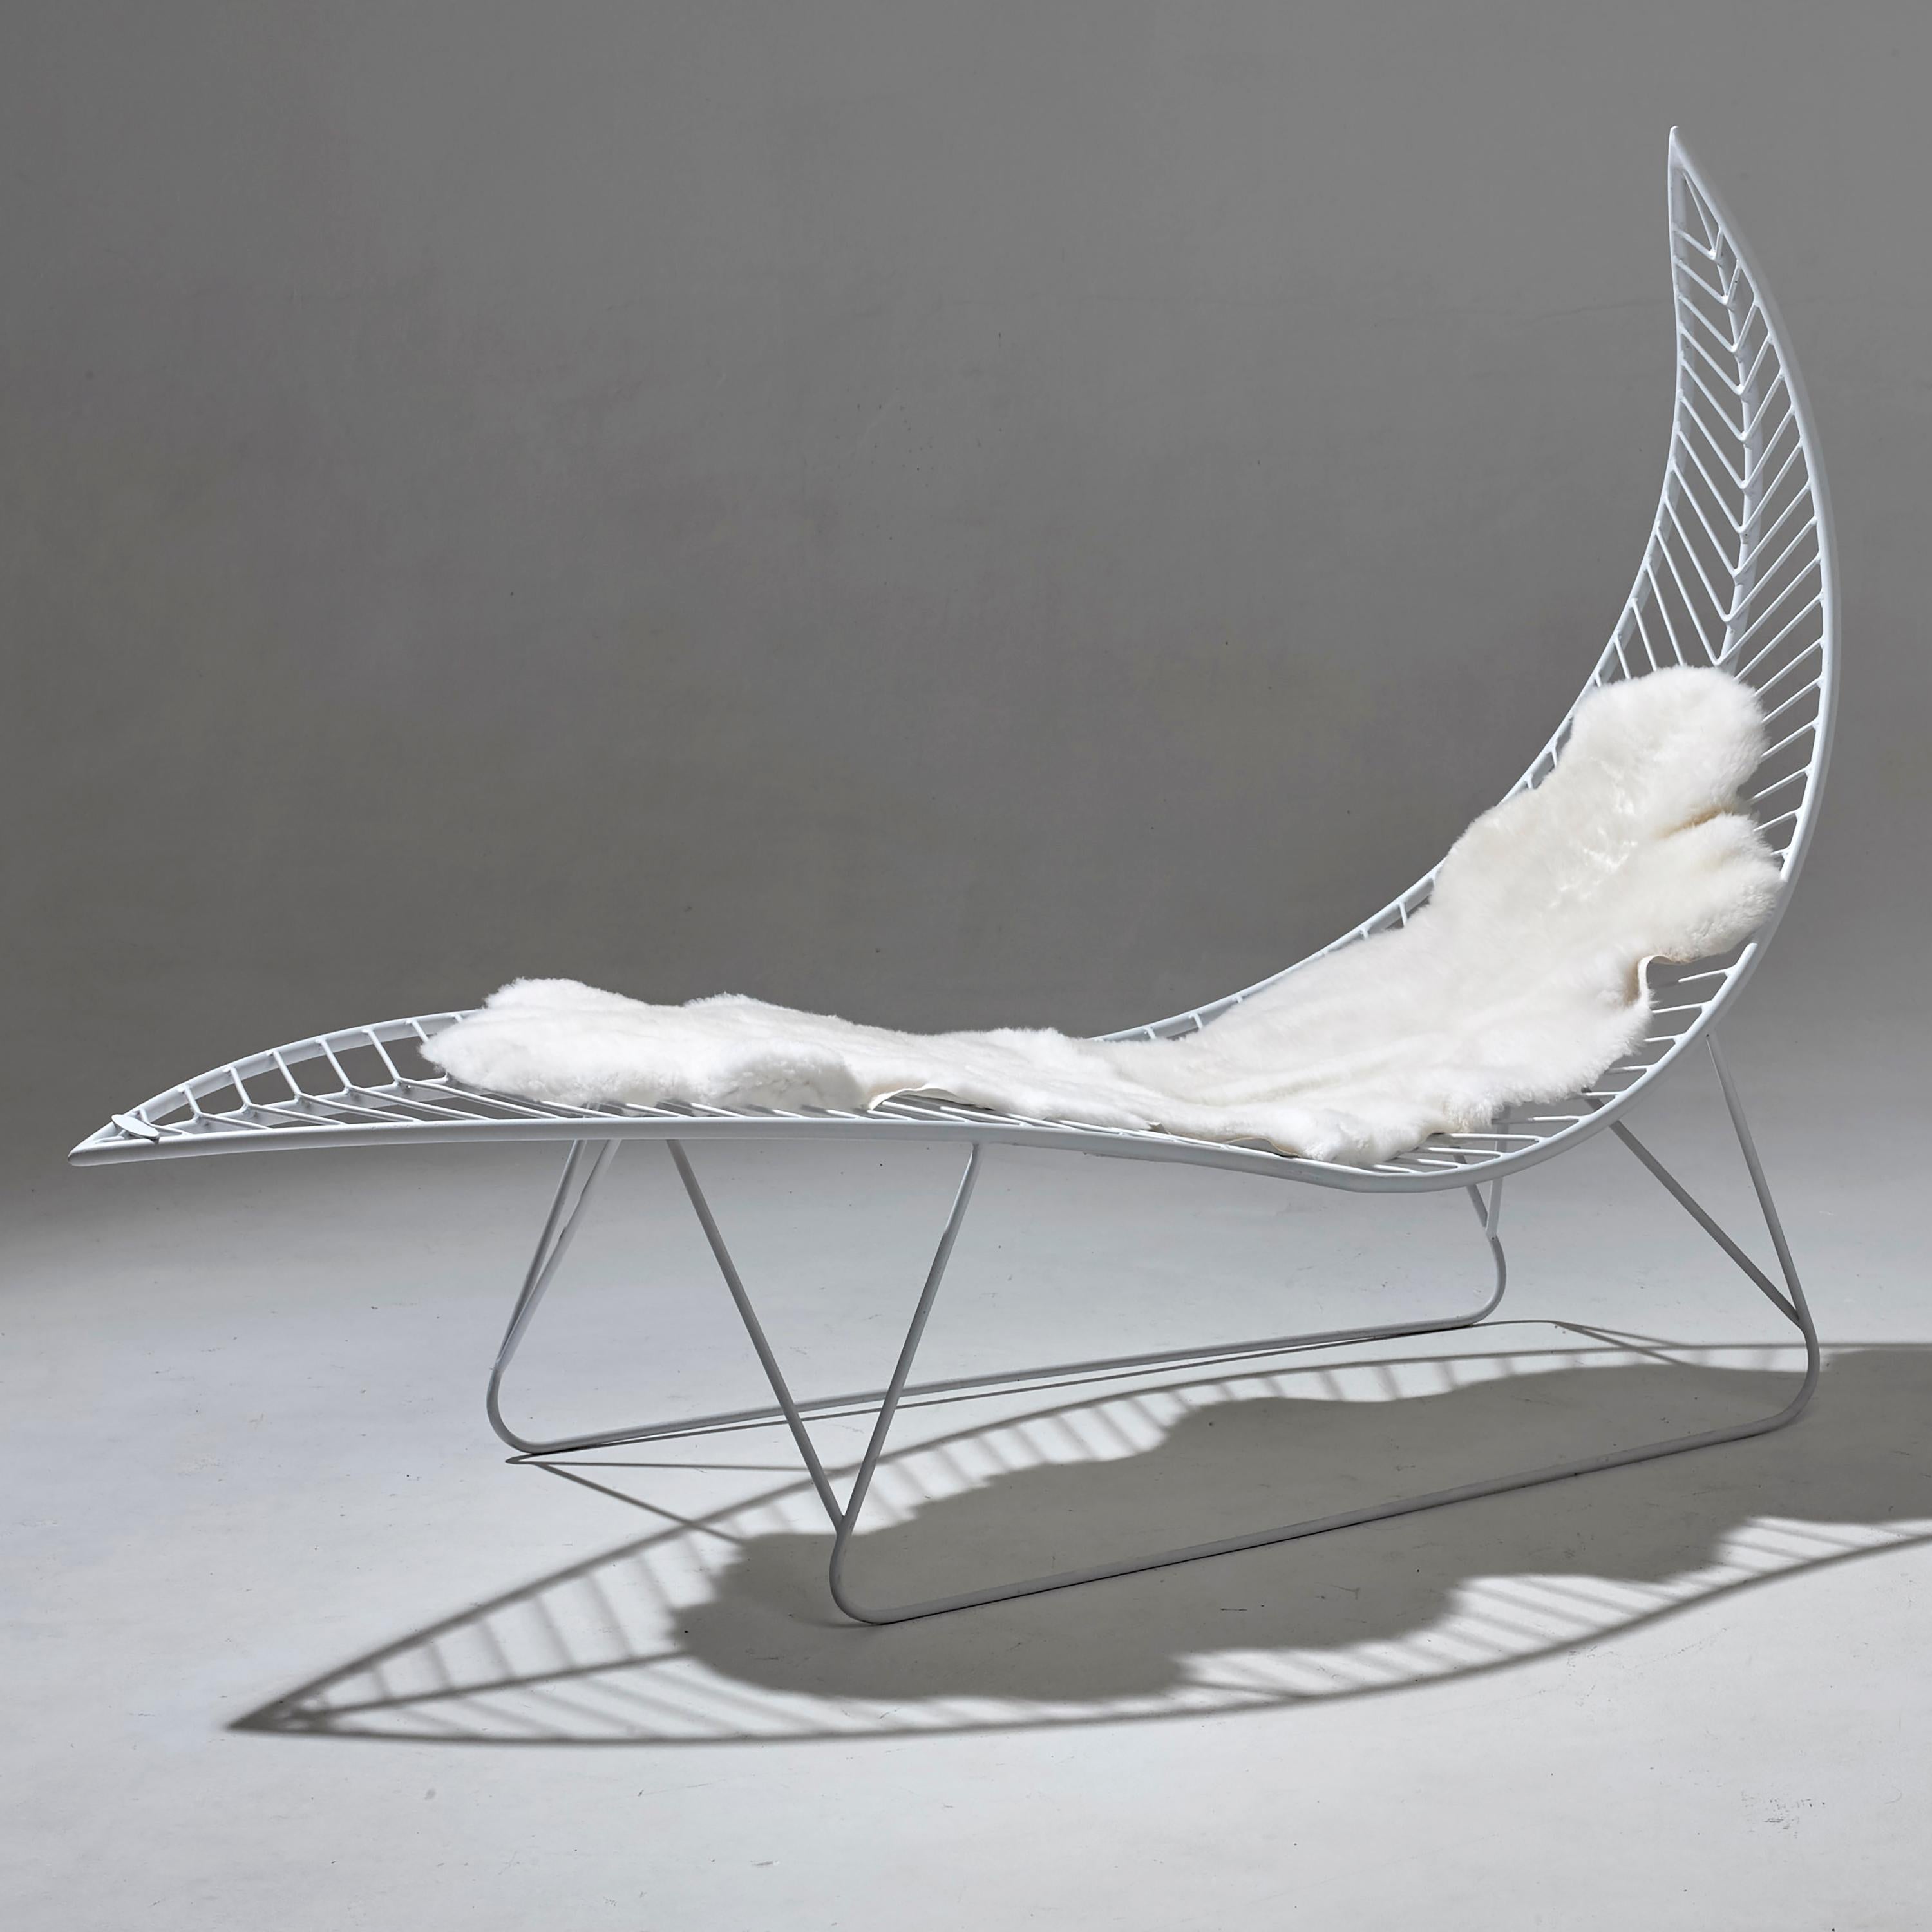 Hand-Crafted Leaf Hanging Swing Chair Modern Steel In/Outdoor 21st Century Base Legs White For Sale